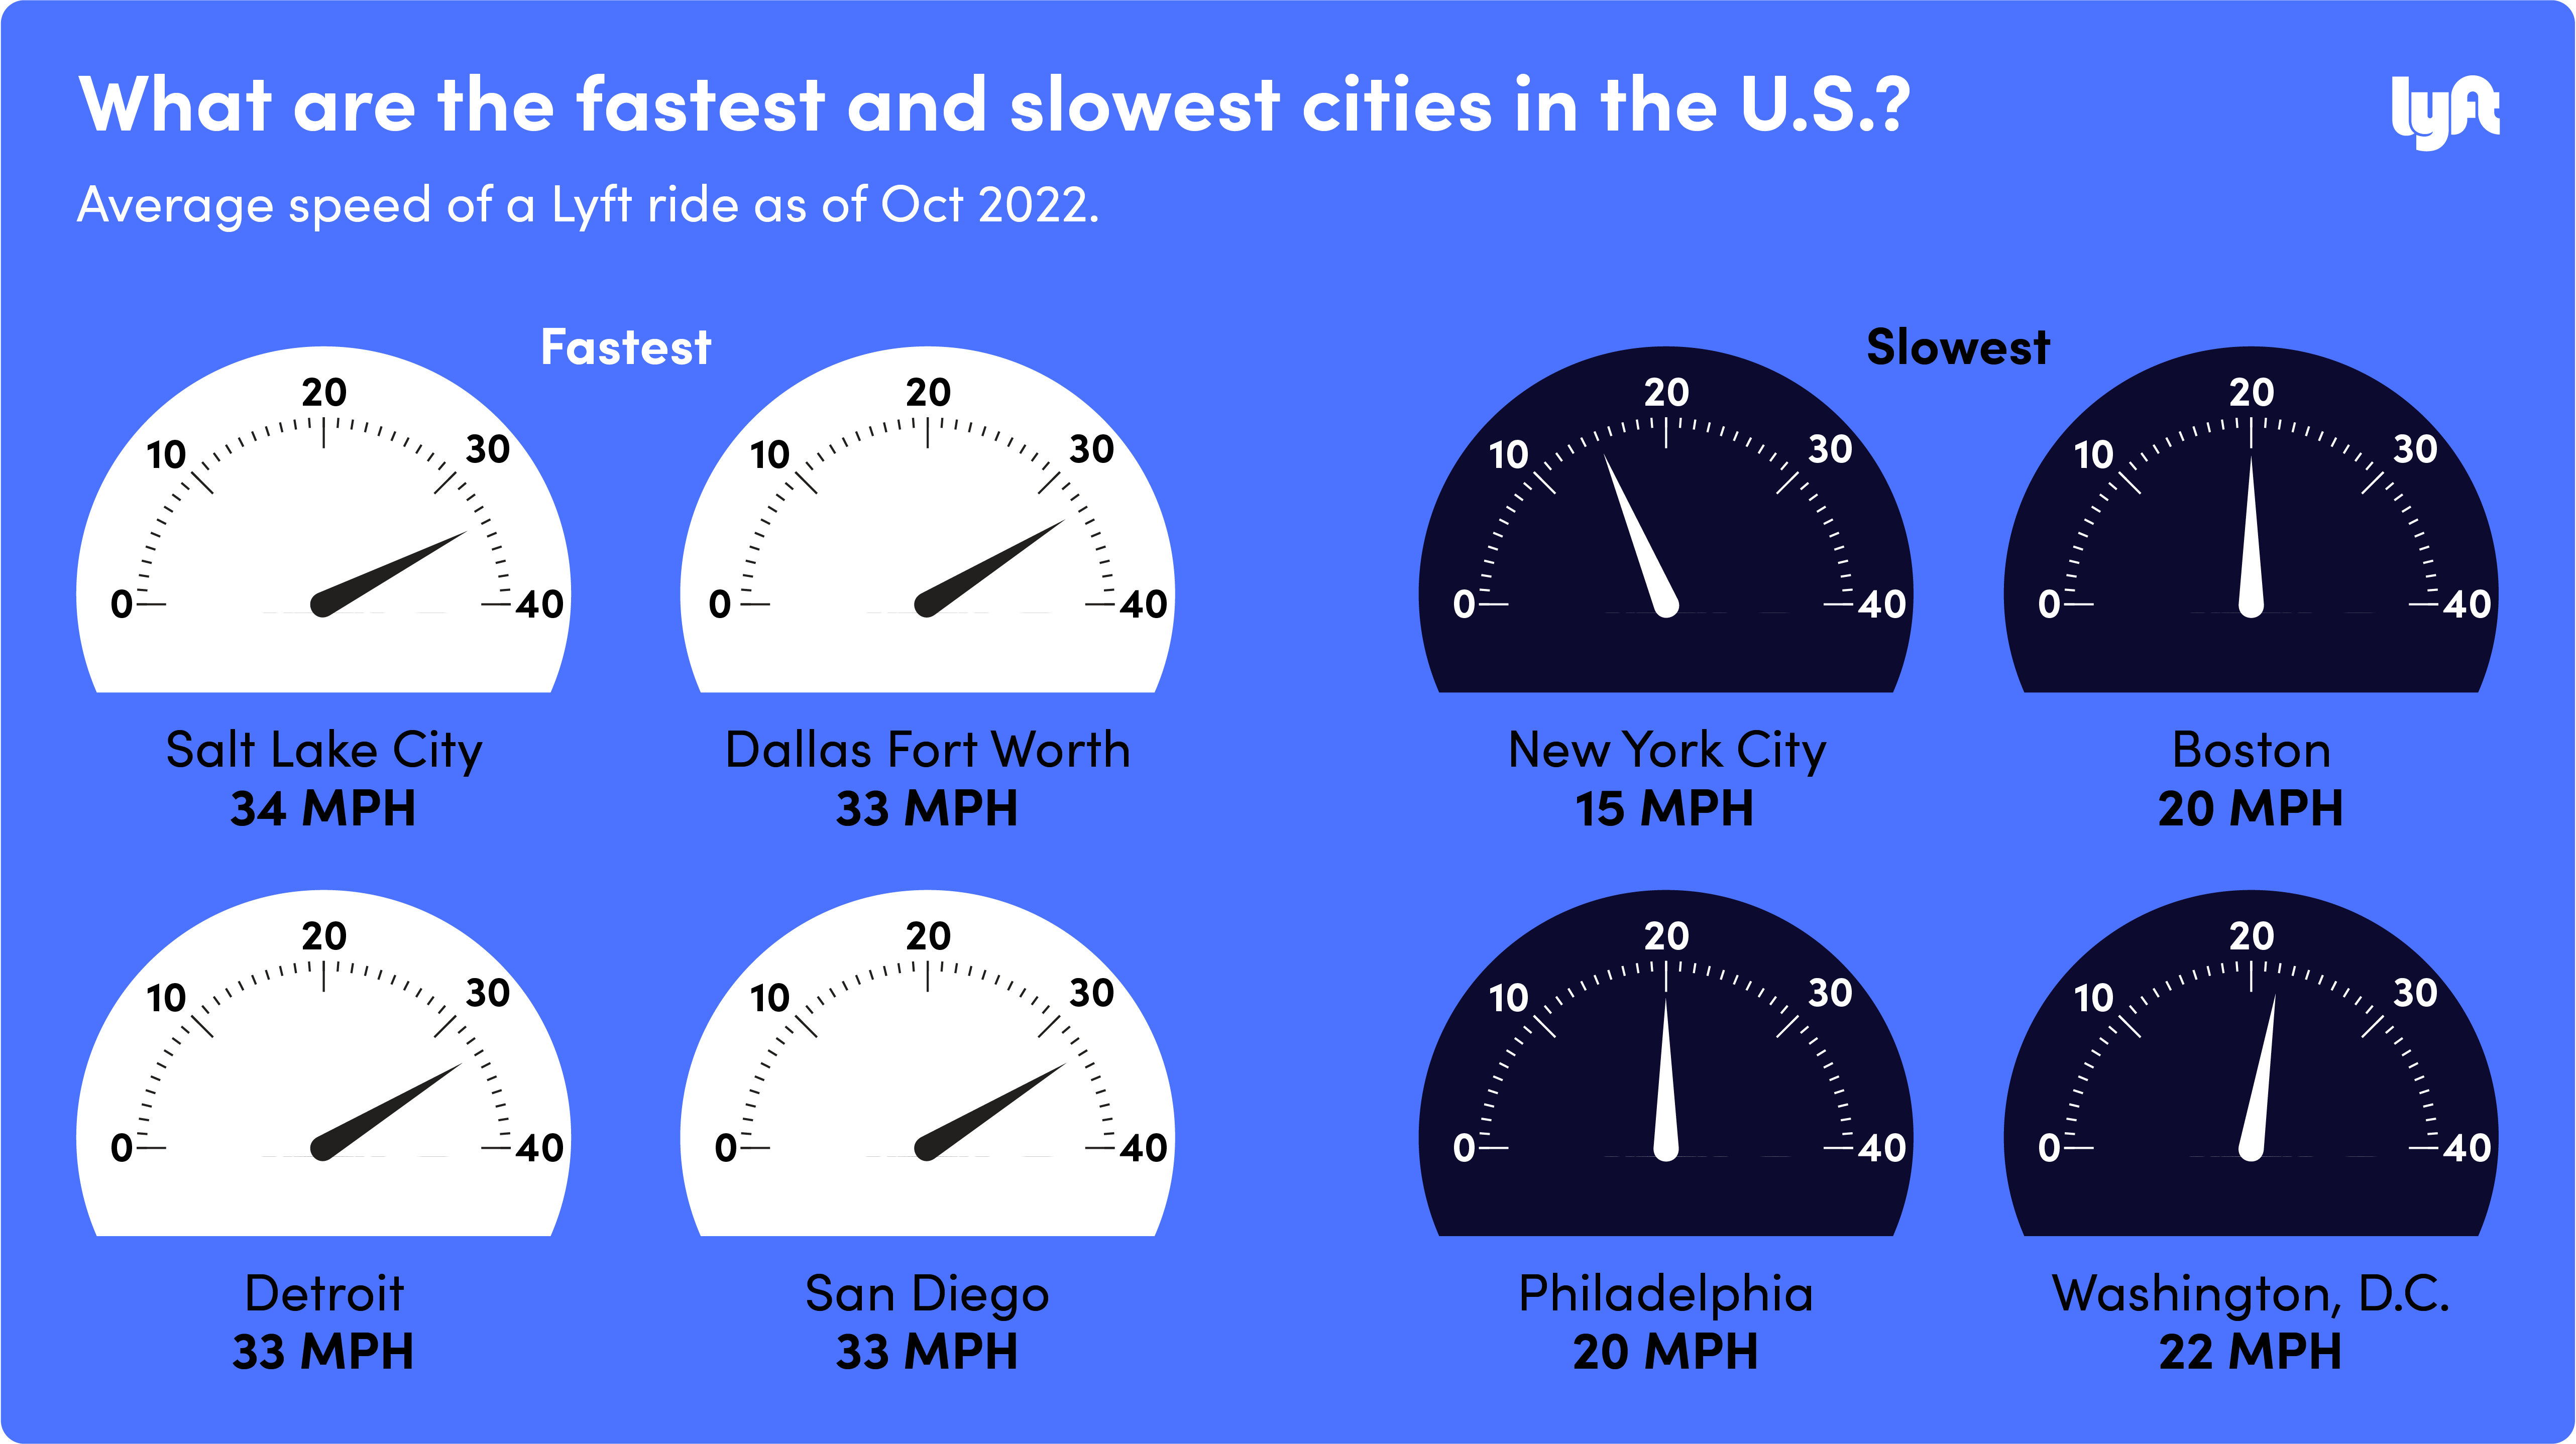 Conceptual graphical art of blue box with speedometer icons. Text reads: What are the fastest and slowest cities in the U.S.?  Average speed of a Lyft ride as of Oct 2022. Fastest: Salt Lake City 34 MPH, Dallas Fort Worth 33 MPH, Detroit 33 MPH, San Diego 33 MPH. Slowest: New York City 15 MPH, Boston 20 MPH, Philadelphia 20 MPH, Washington, D.C. 22 MPH.